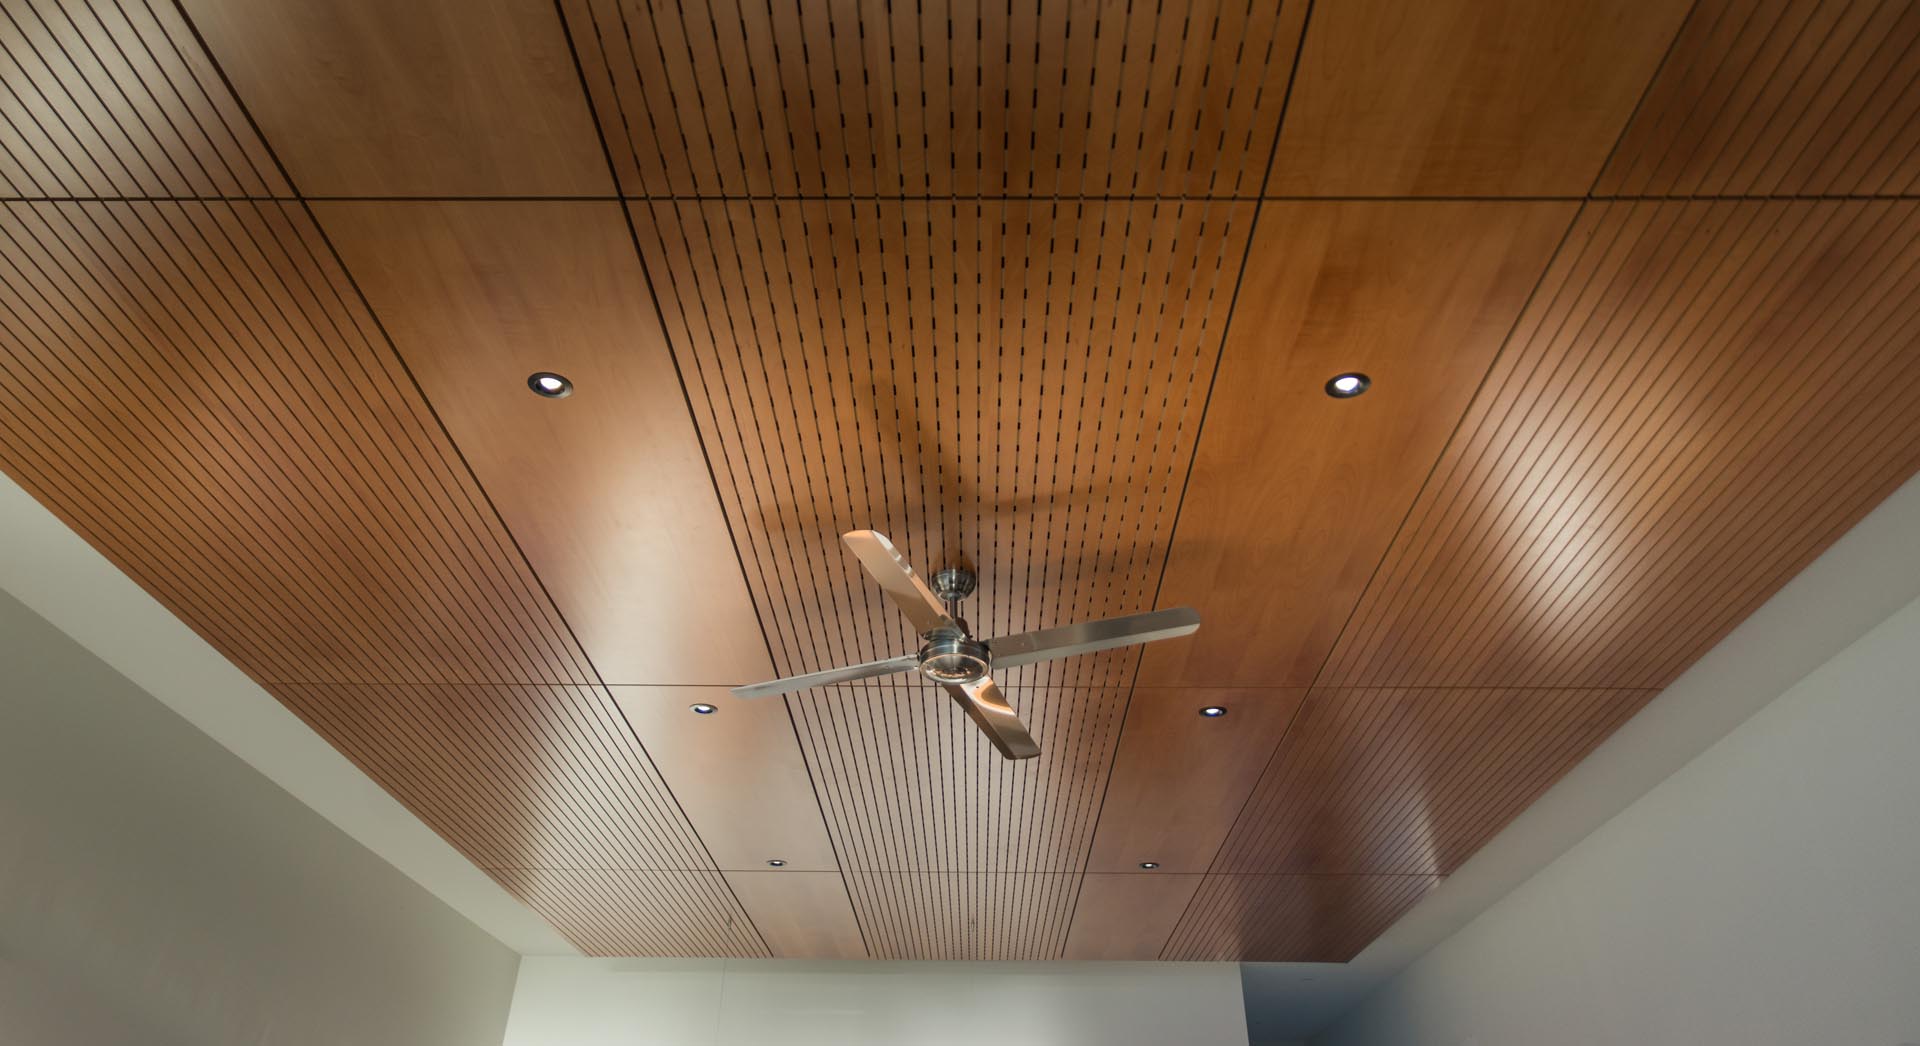 An open plan interior with a wood ceiling accent and hidden lighting.